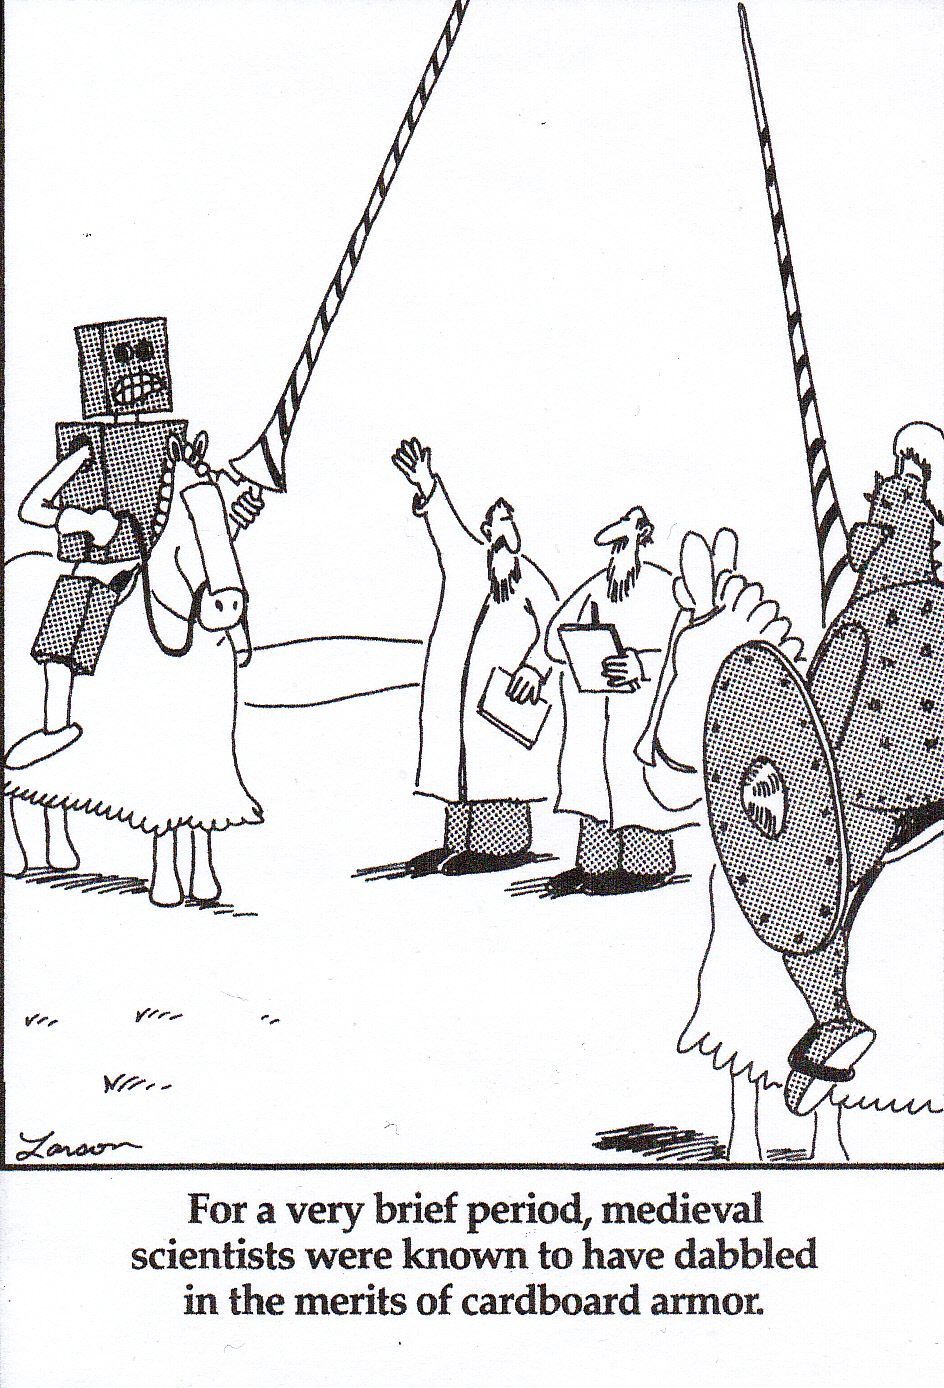 far side comic, scientists are testing armor of two knights, one is in cardboard and looks scared